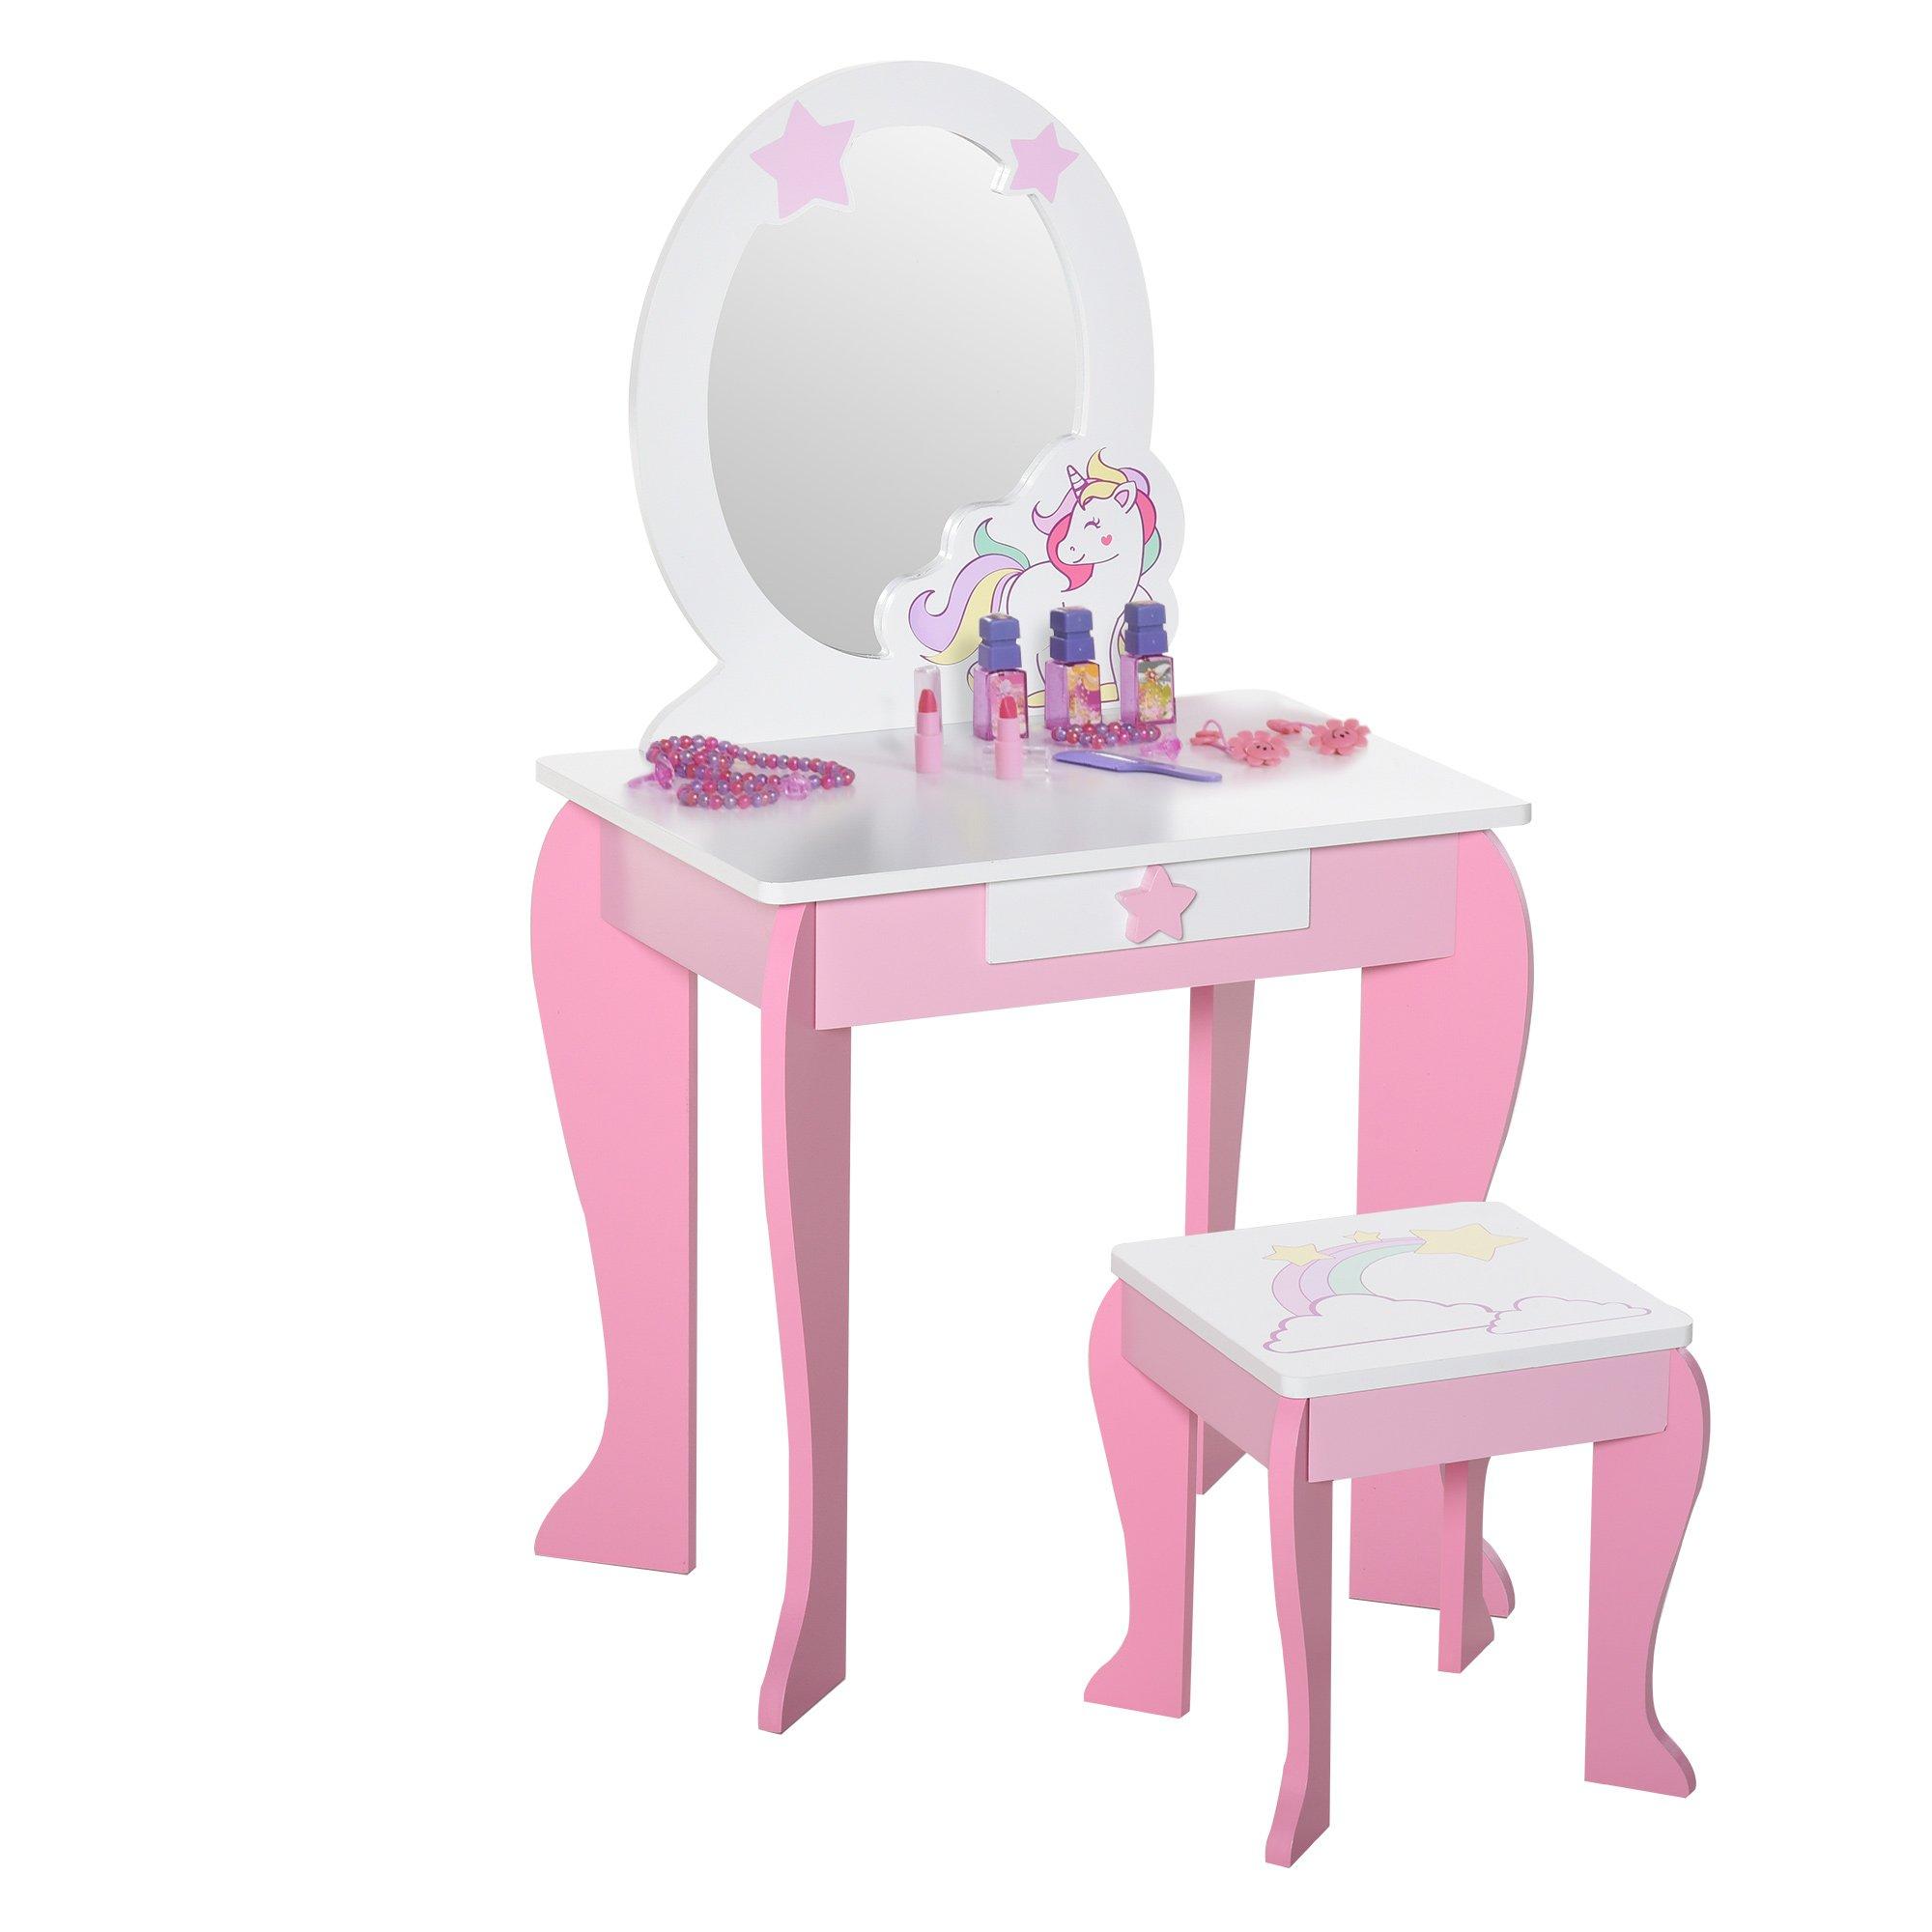 Kids Dressing Table, Girls Vanity Set with Mirror and Stool, Unicorn